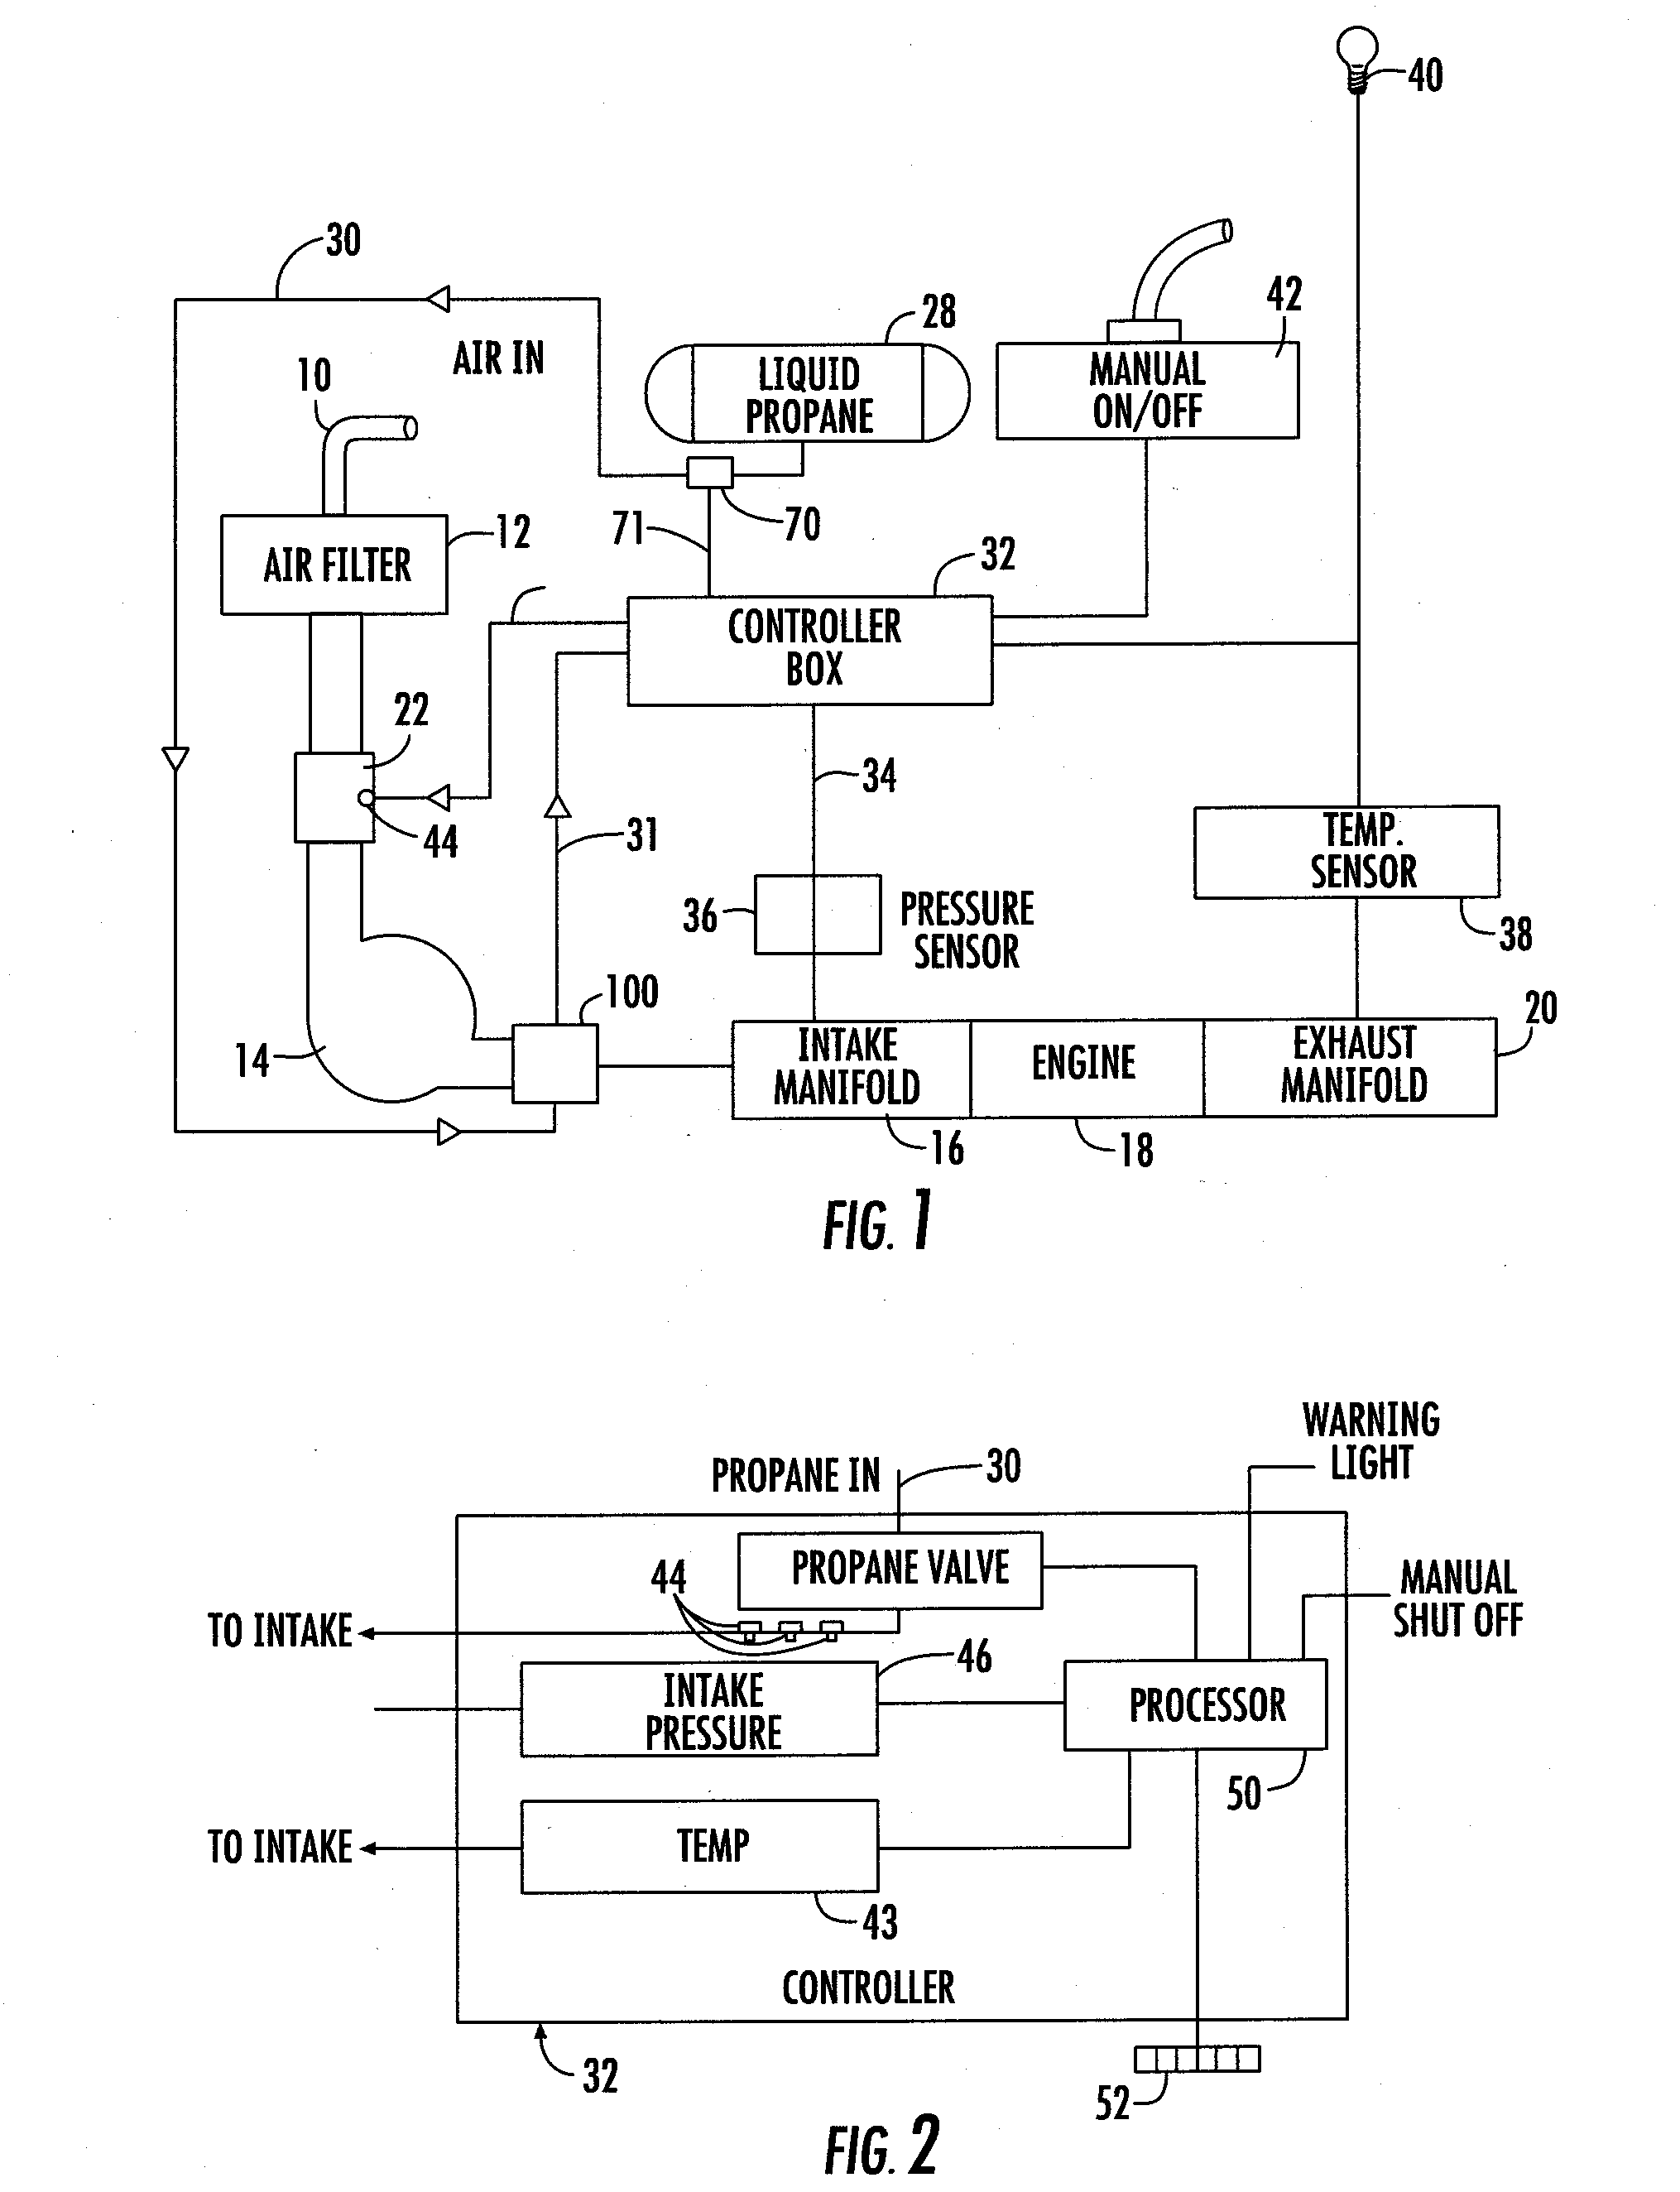 Super Cooled Air And Fuel Induction System For Internal Combustion Engines